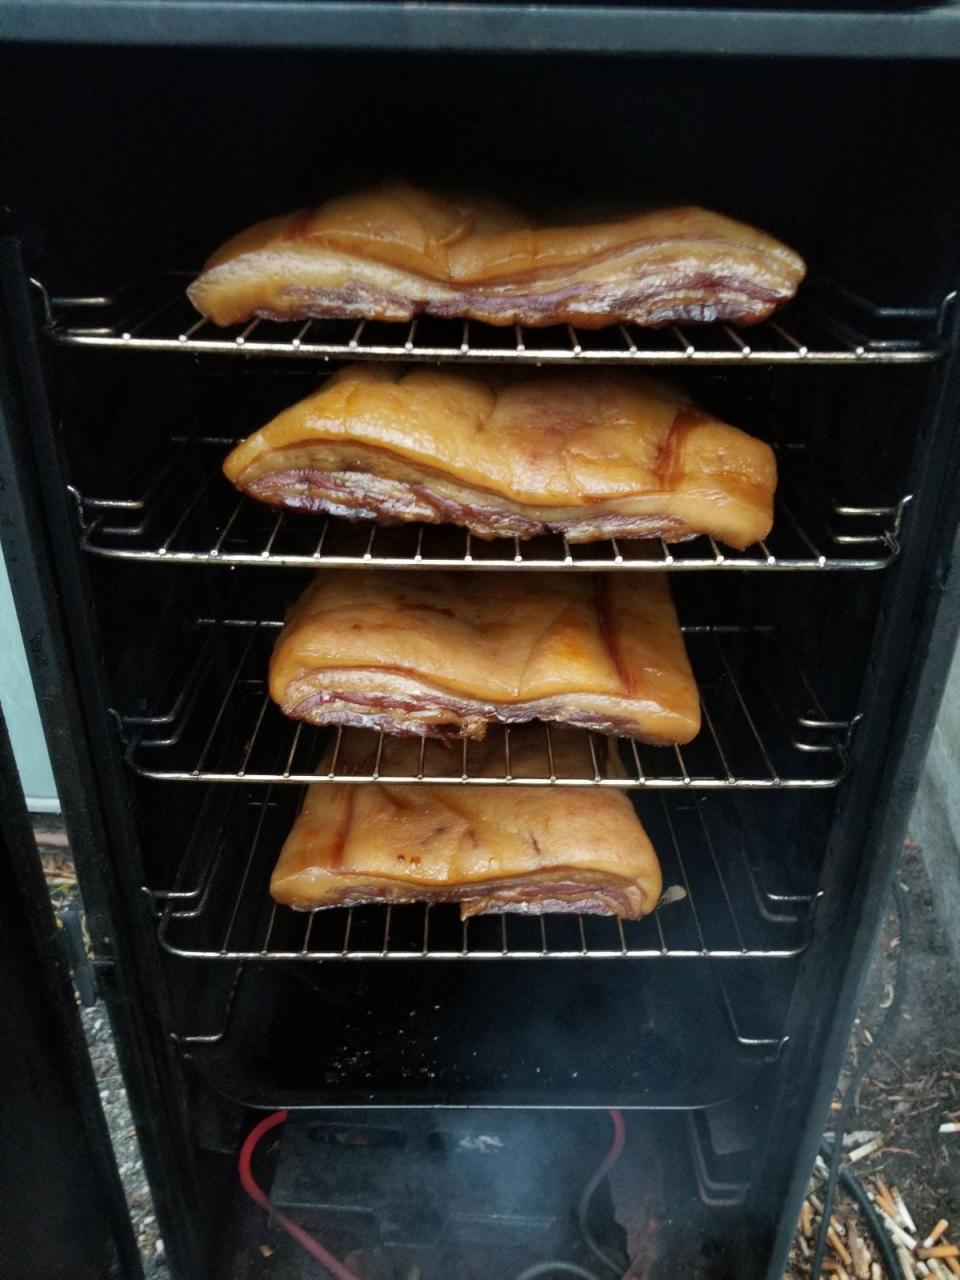 Doug Stringer, executive chef at Motor Bar & Restaurant at the Harley-Davidson Museum, makes bacon in his smoker at home and is hoping to do so at the restaurant as well.